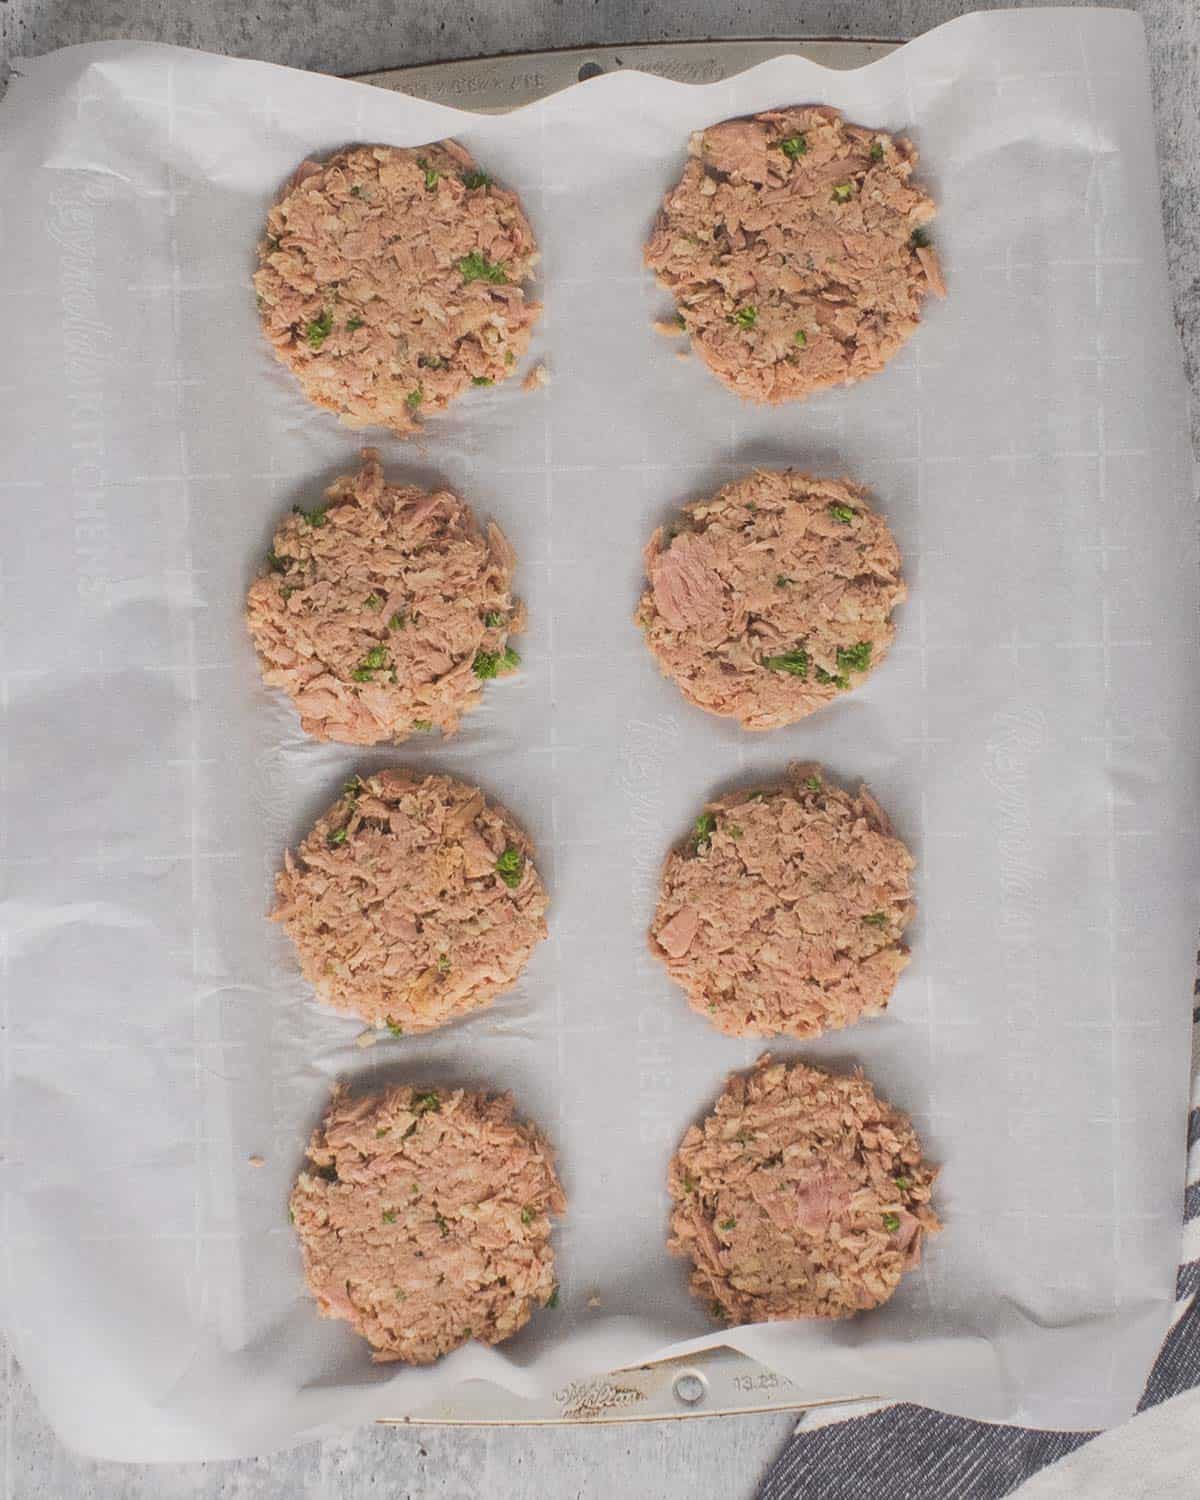 tuna cakes formed